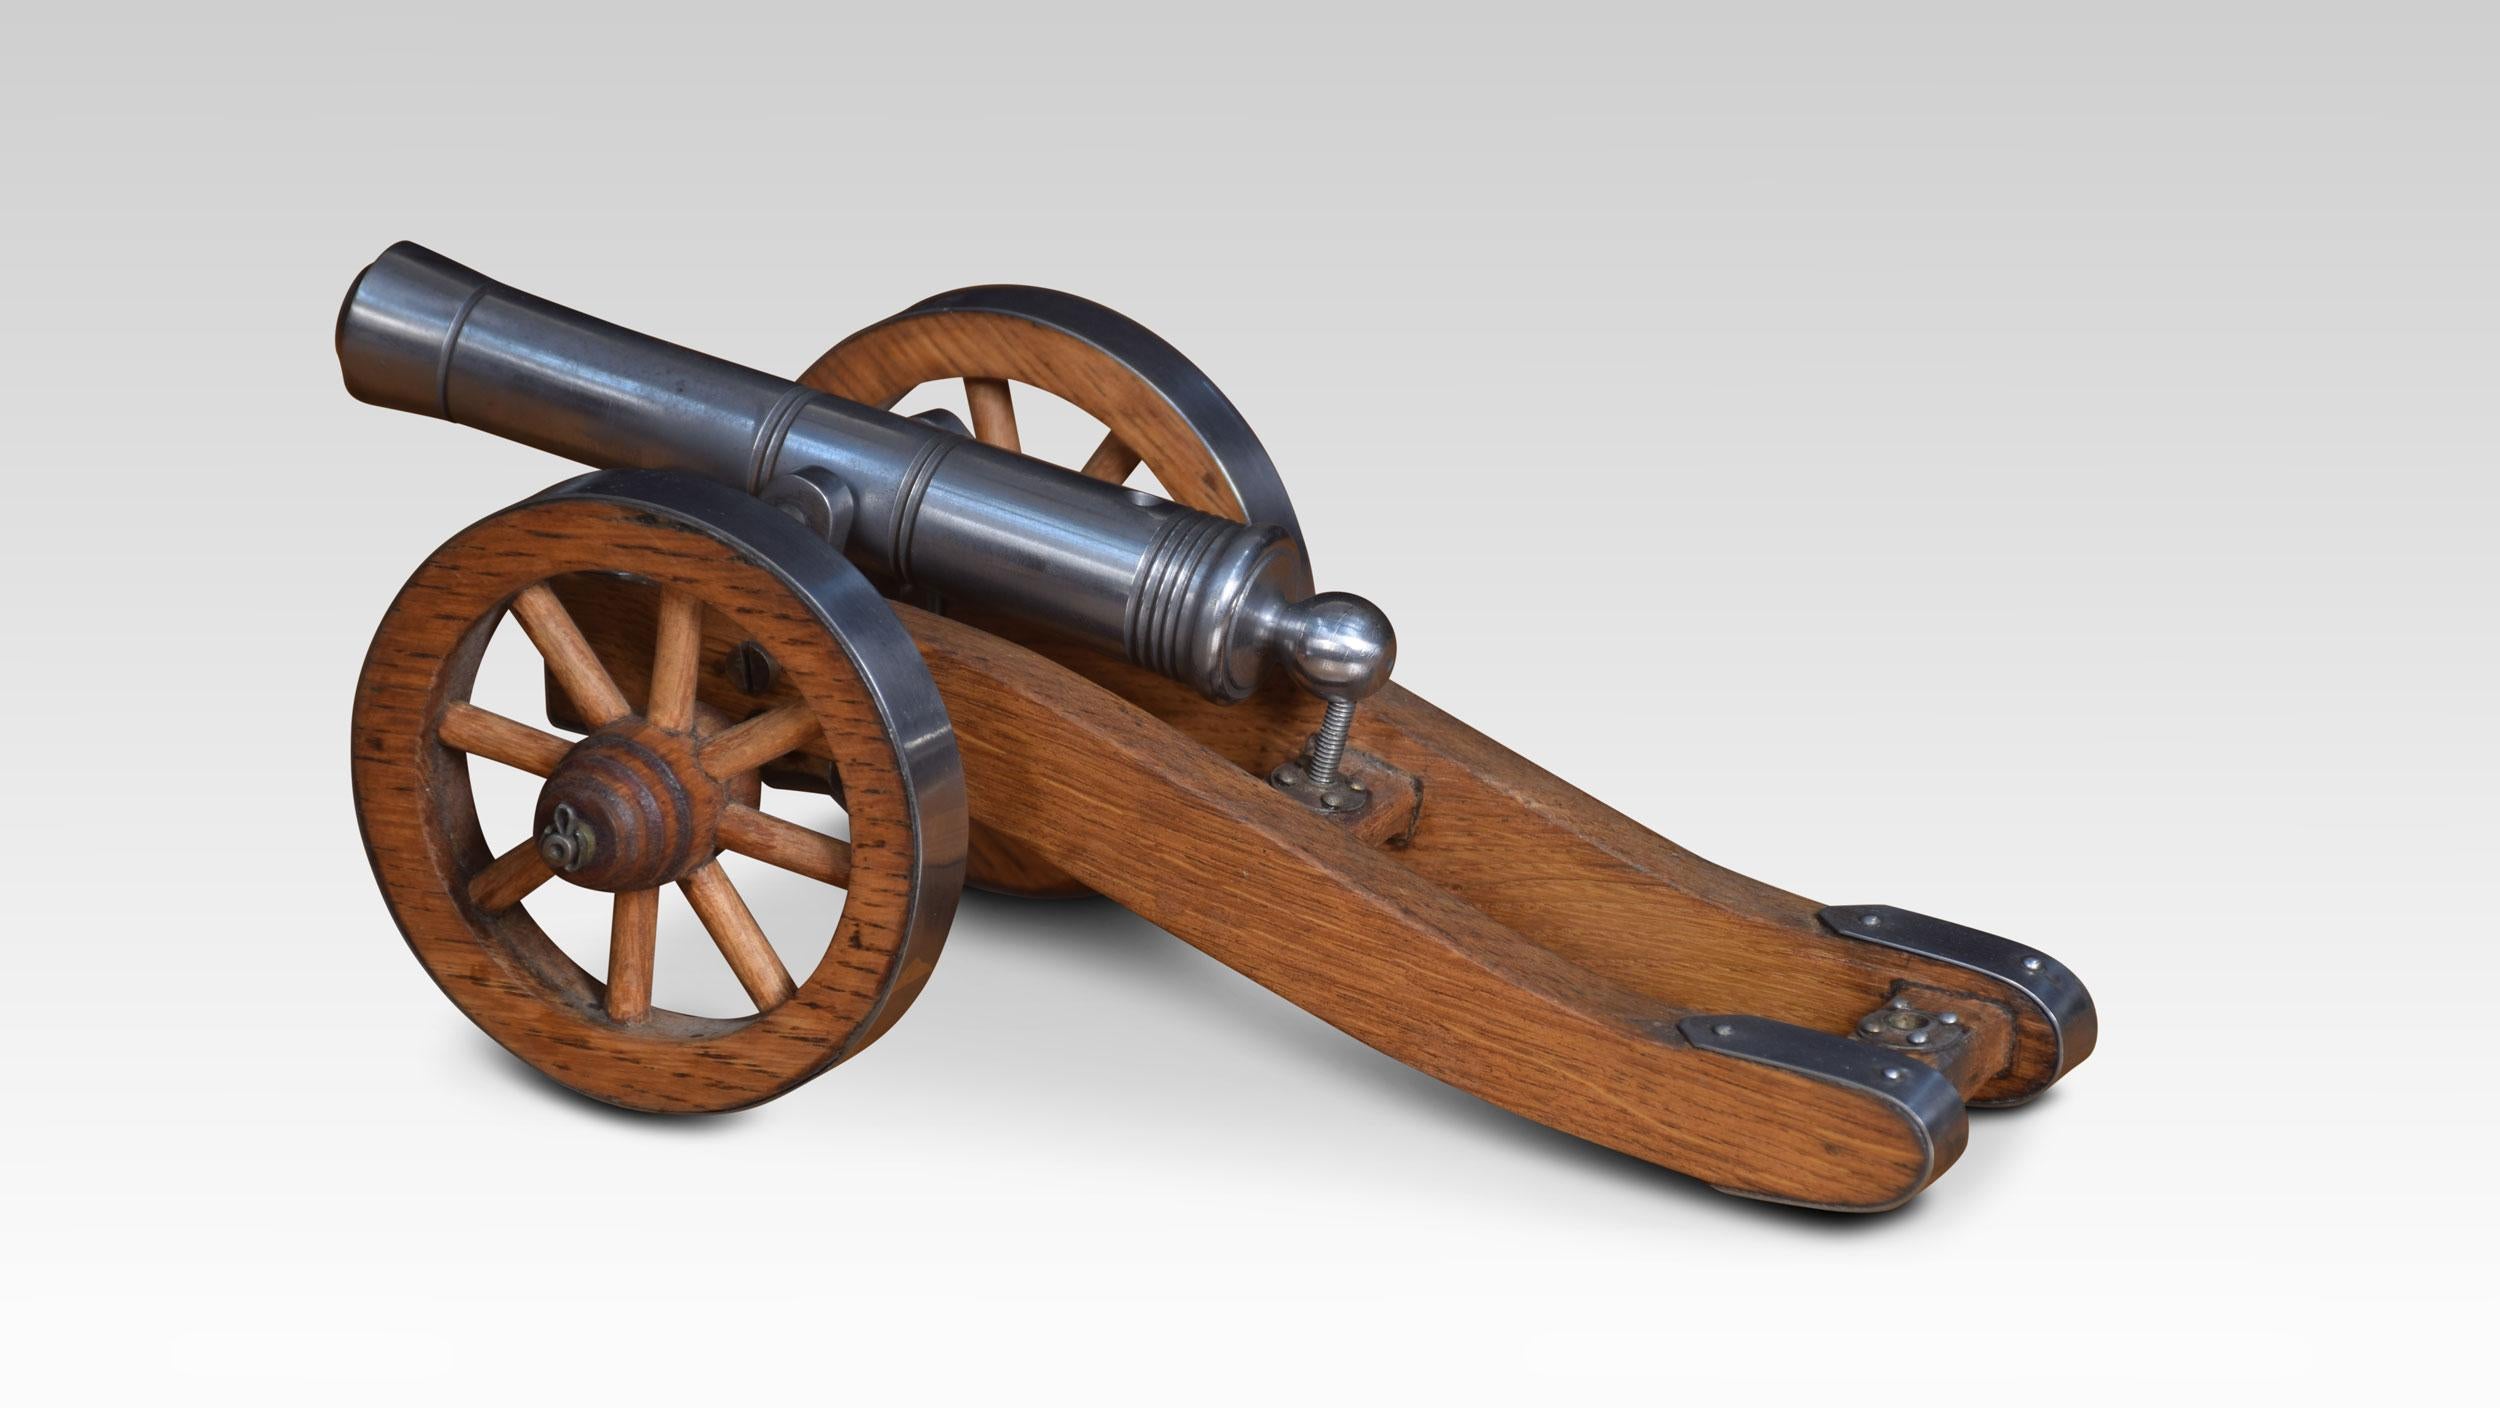 Signal cannon with a polished steel barrel and elevating screw mounted on a wooden carriage with steel rims to the wheels. Barrel length 6 inches
Dimensions:
Height 4 inches
Width 6 inches
Depth 9.5 inches.